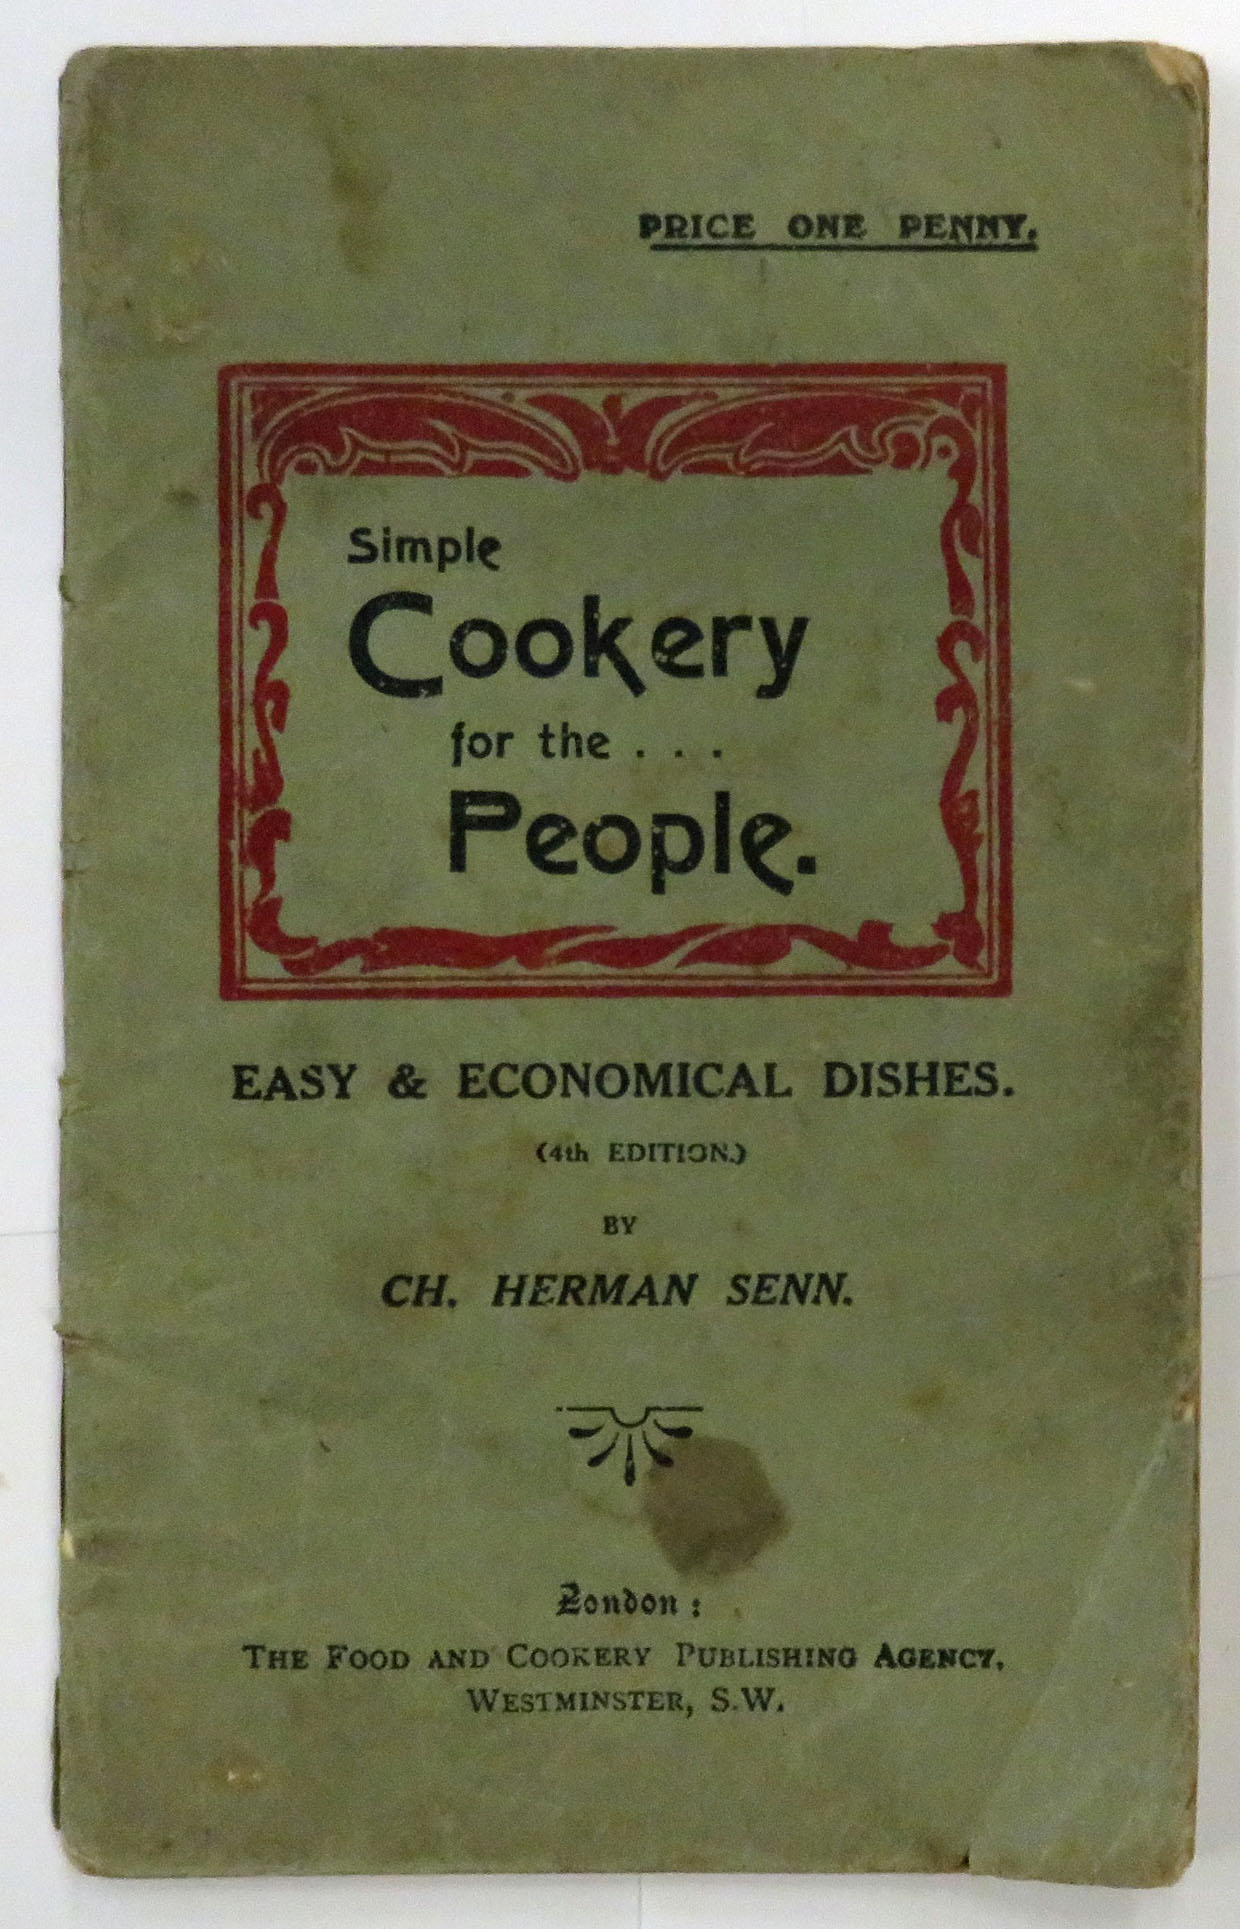 Simple Cookery for the People